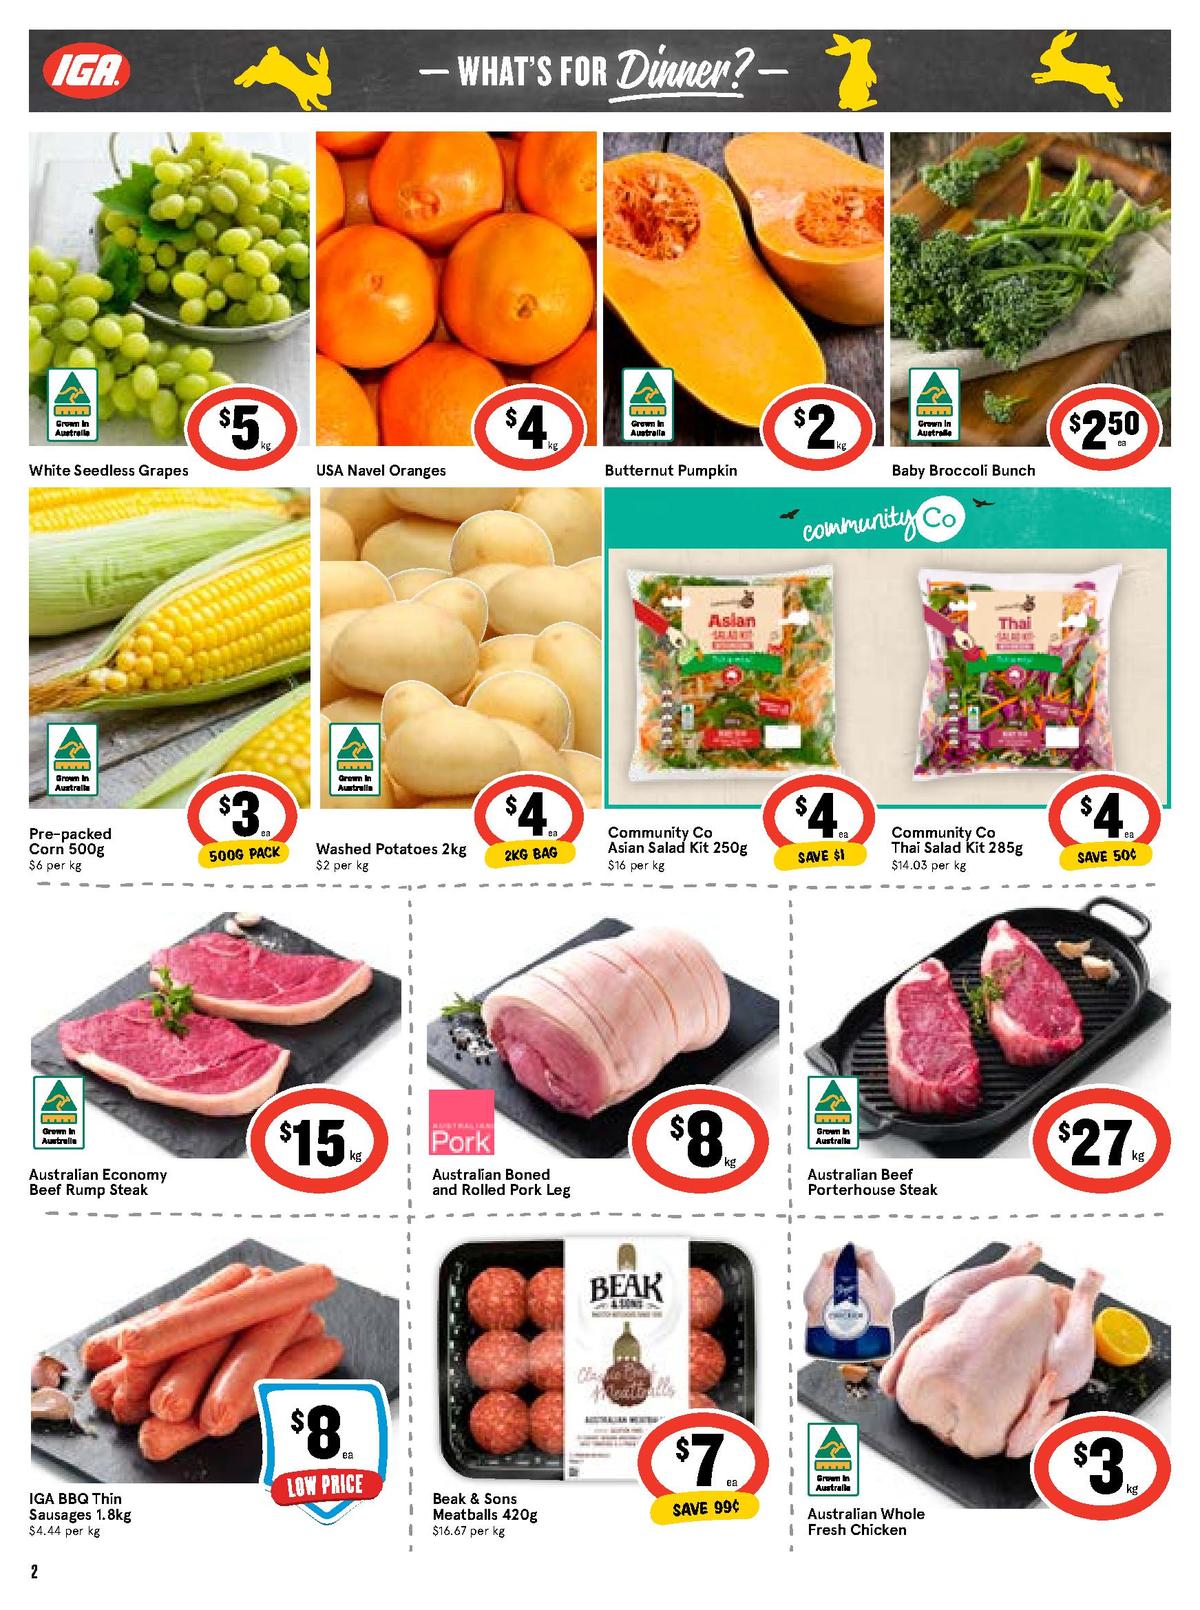 IGA Catalogues from 10 April